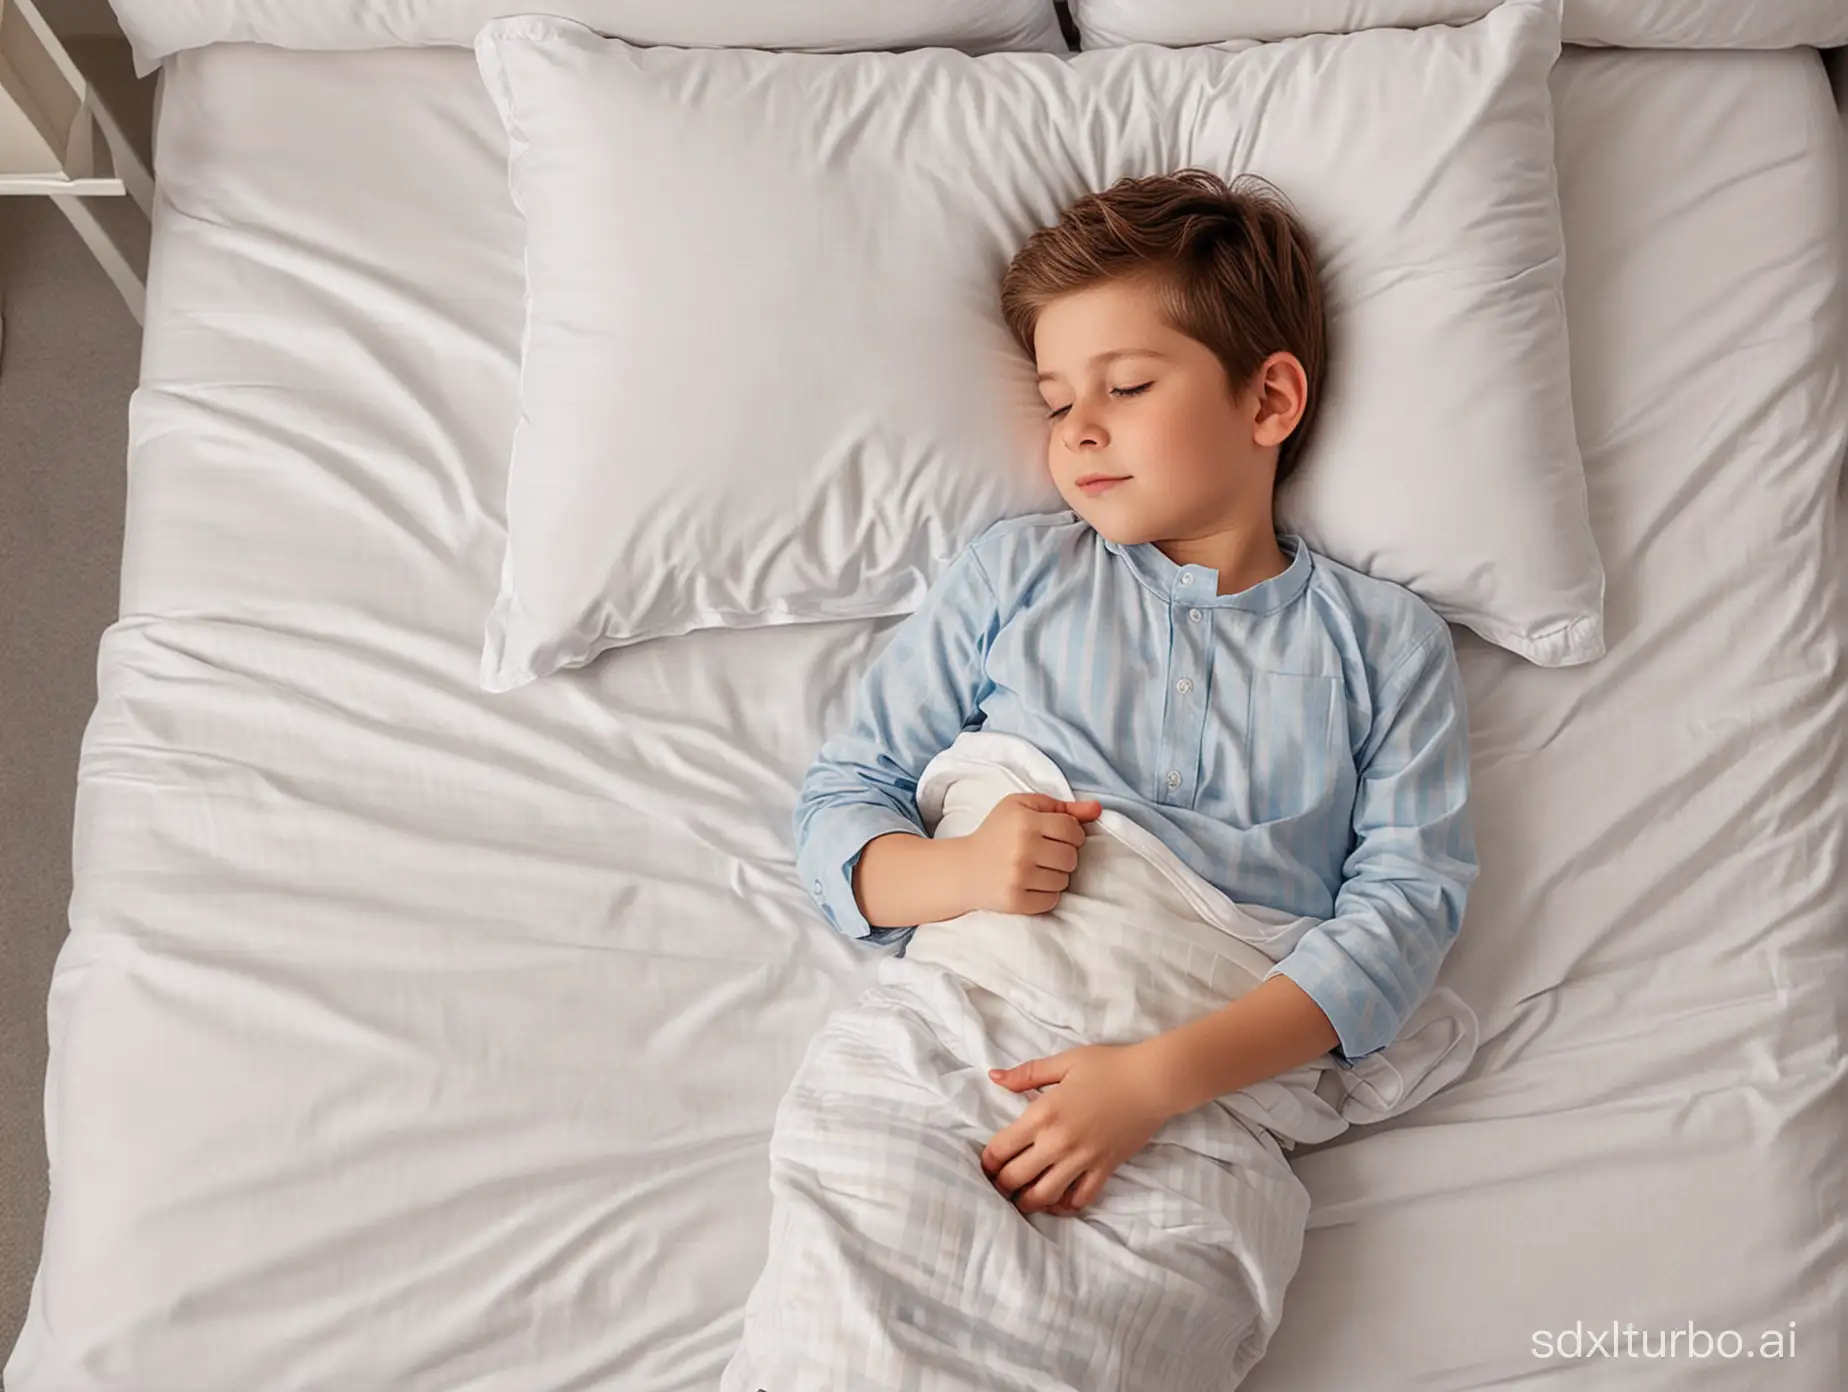 young boy, bed, sleeping, high quality